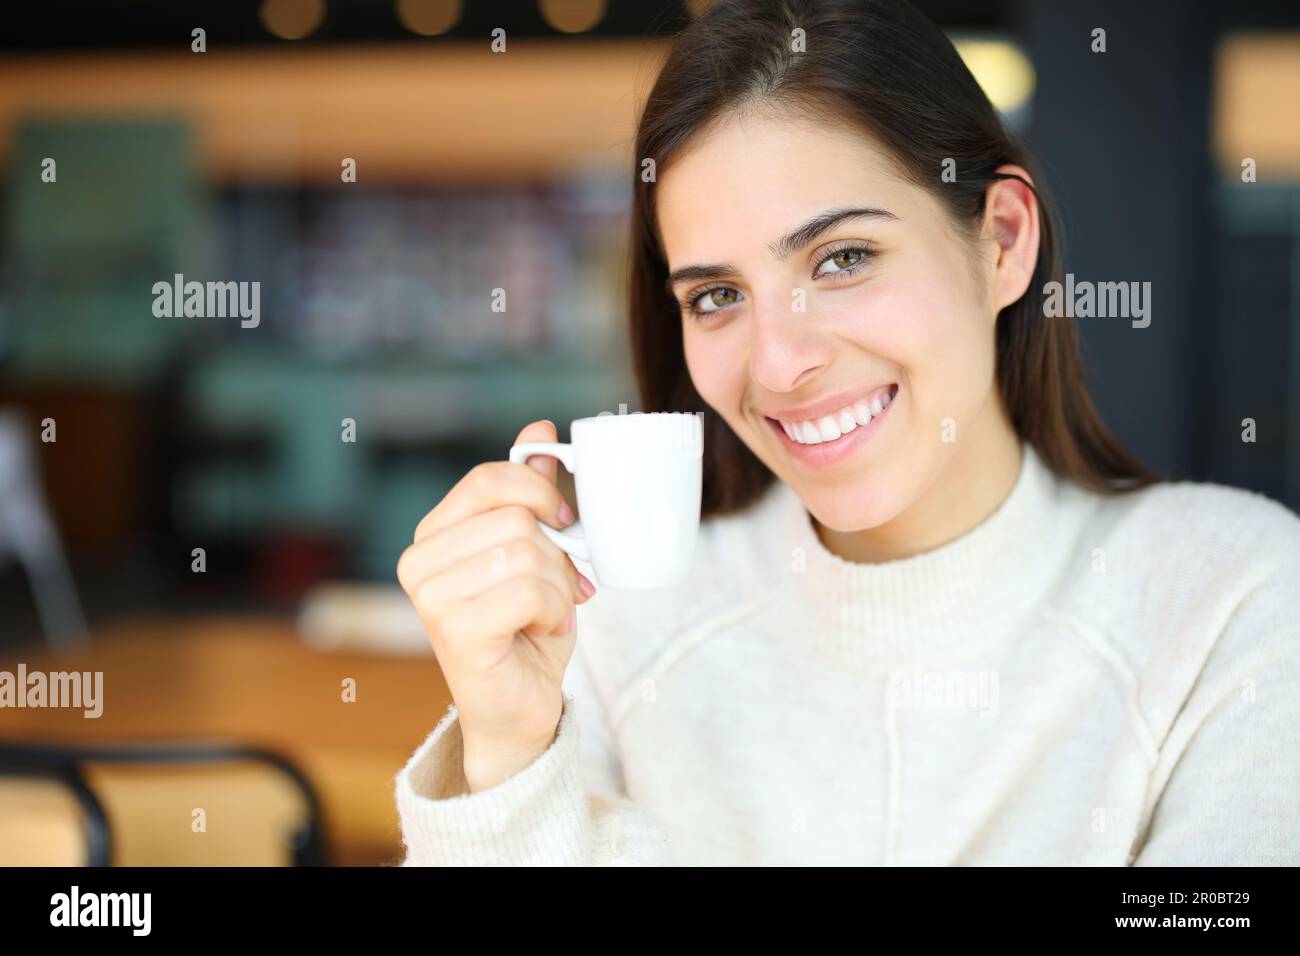 Happy woman smiling holding coffee cup in a bar looking at camera Stock Photo